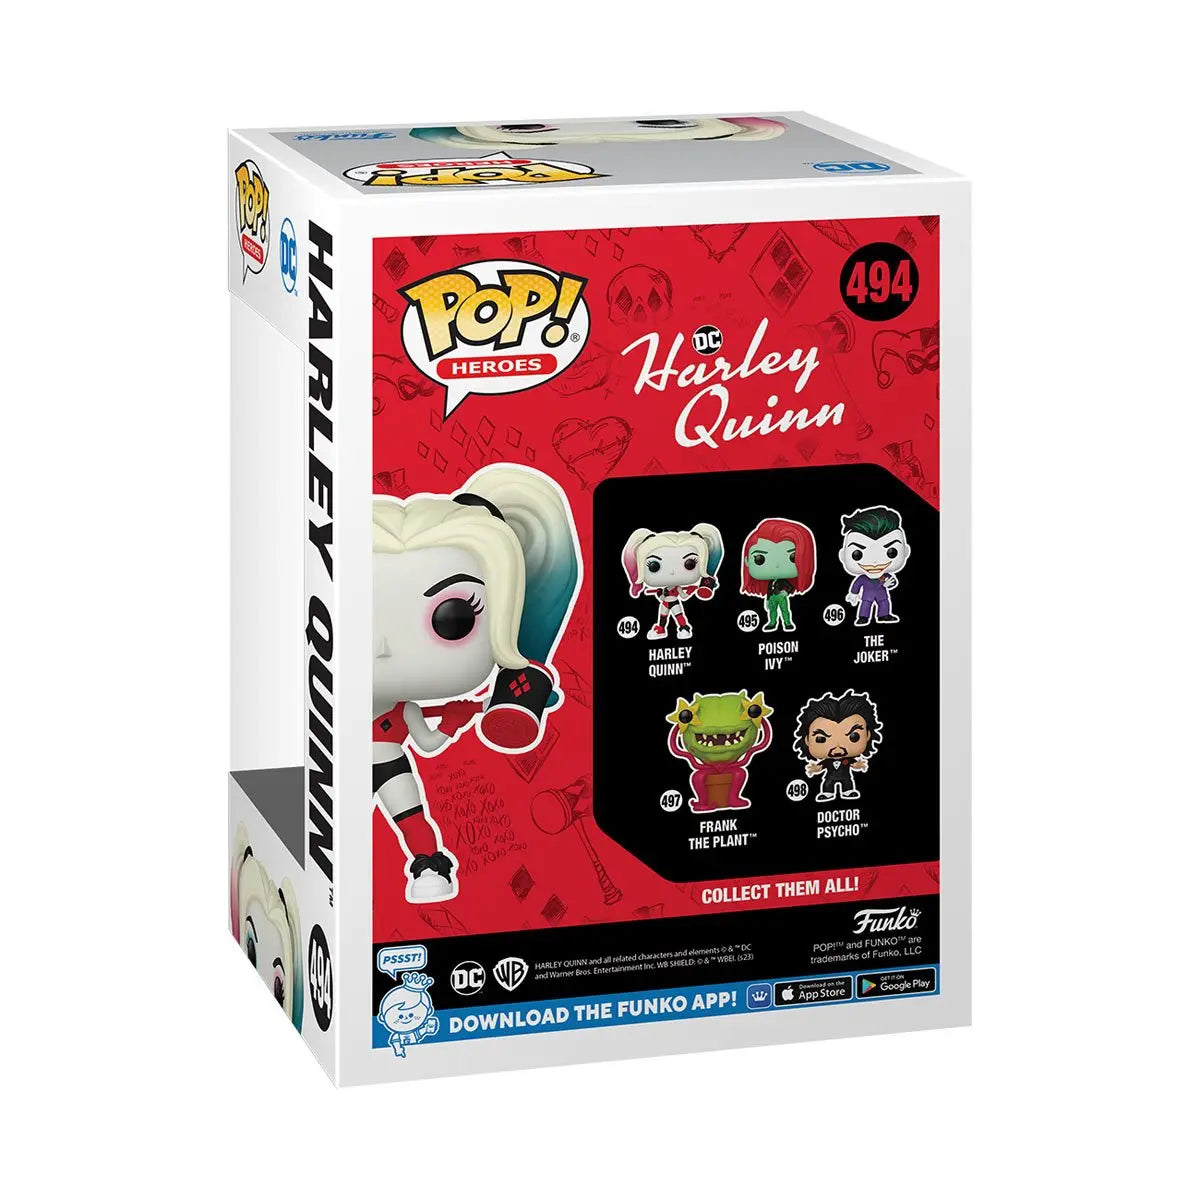 Harley Quinn Animated Series Harley Quinn with Mallet Funko Pop – FunkoSpace